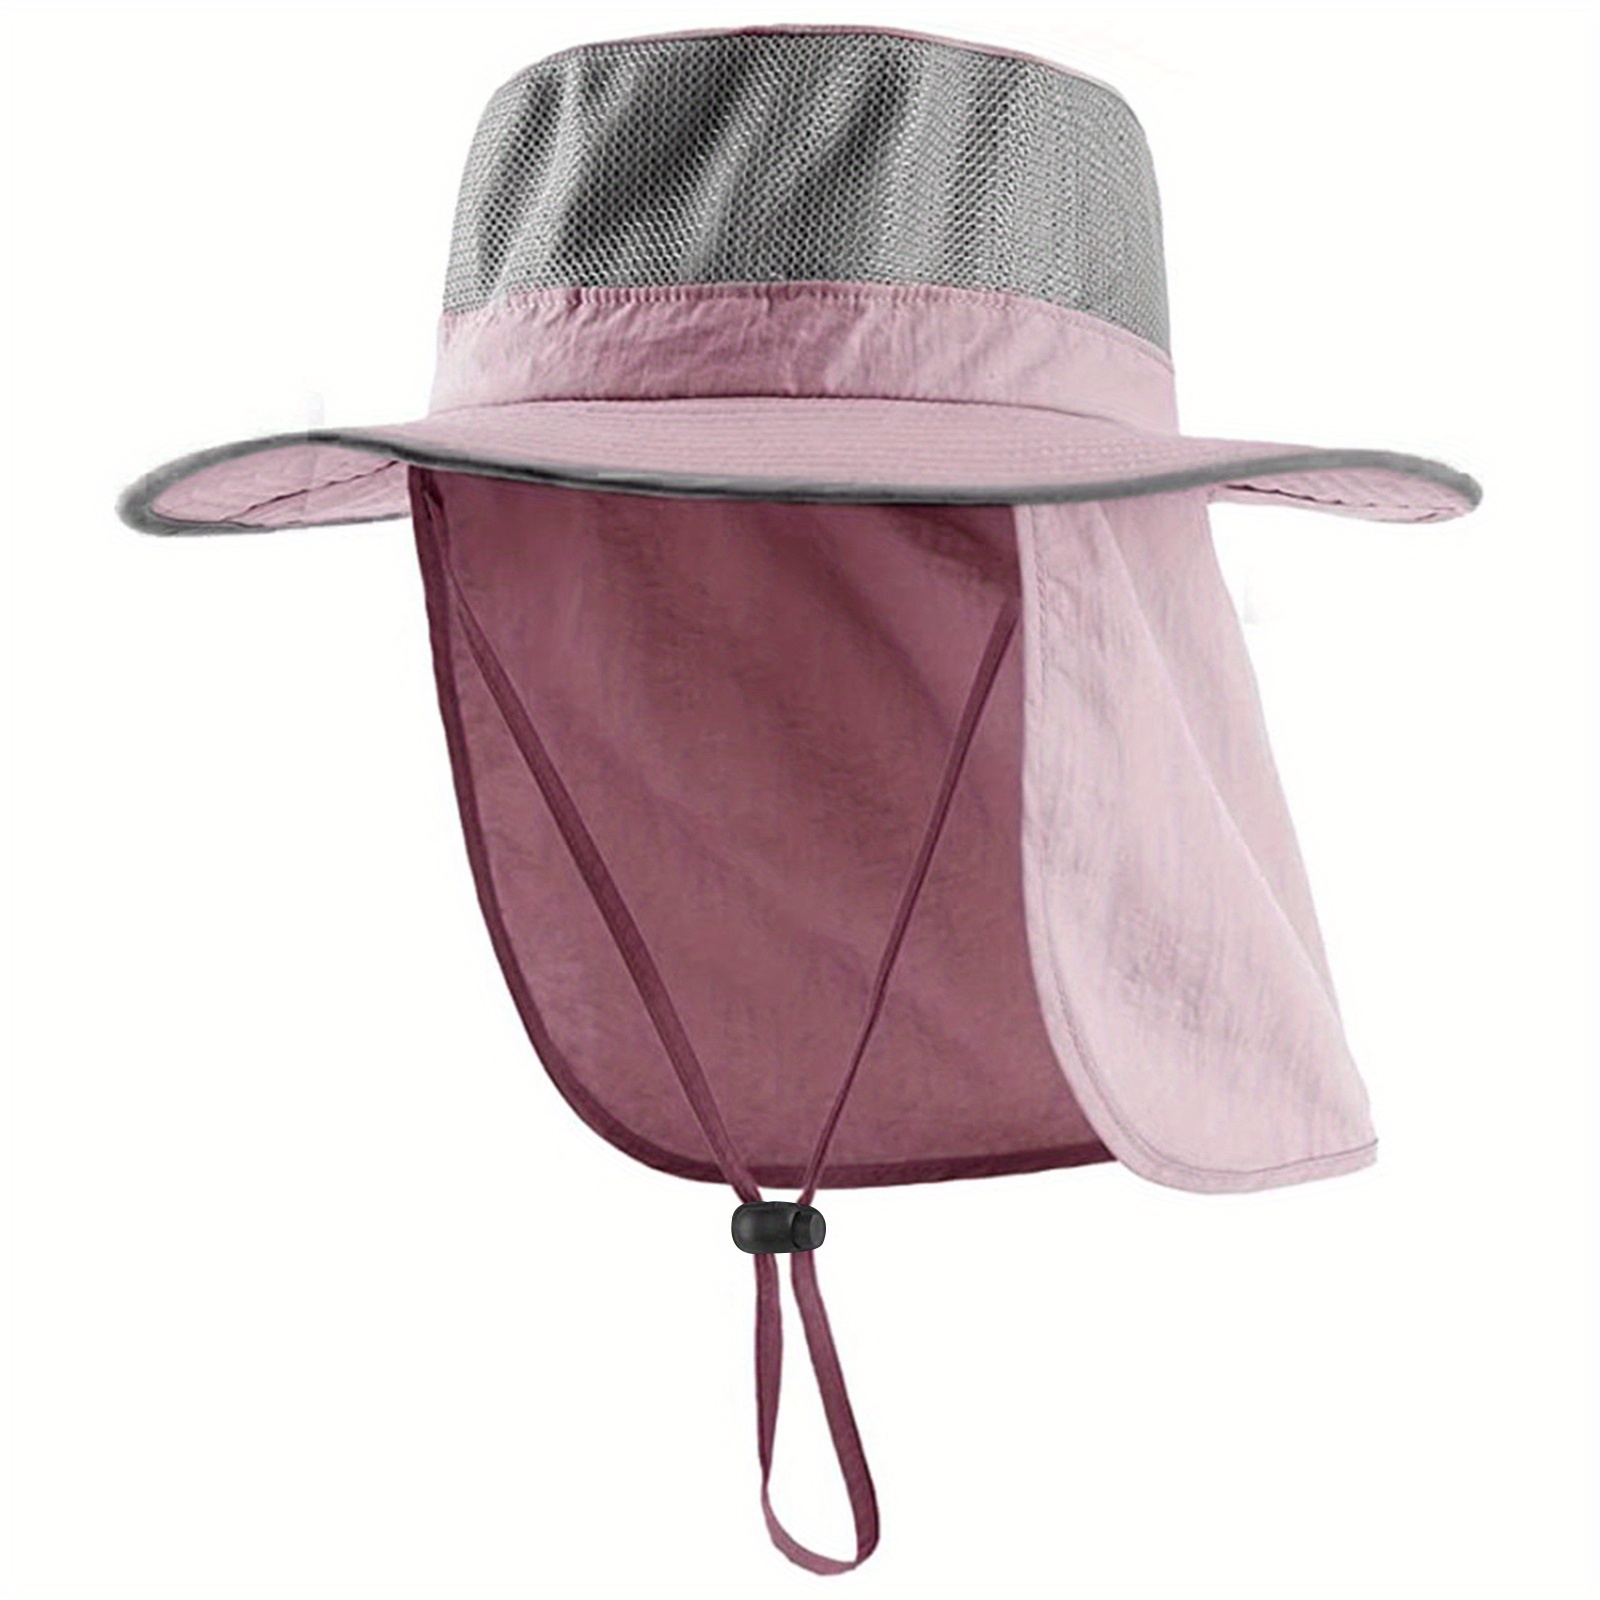 Sun Hat For Men Women Wide Brim Hiking Hat Sun Protection Hat With